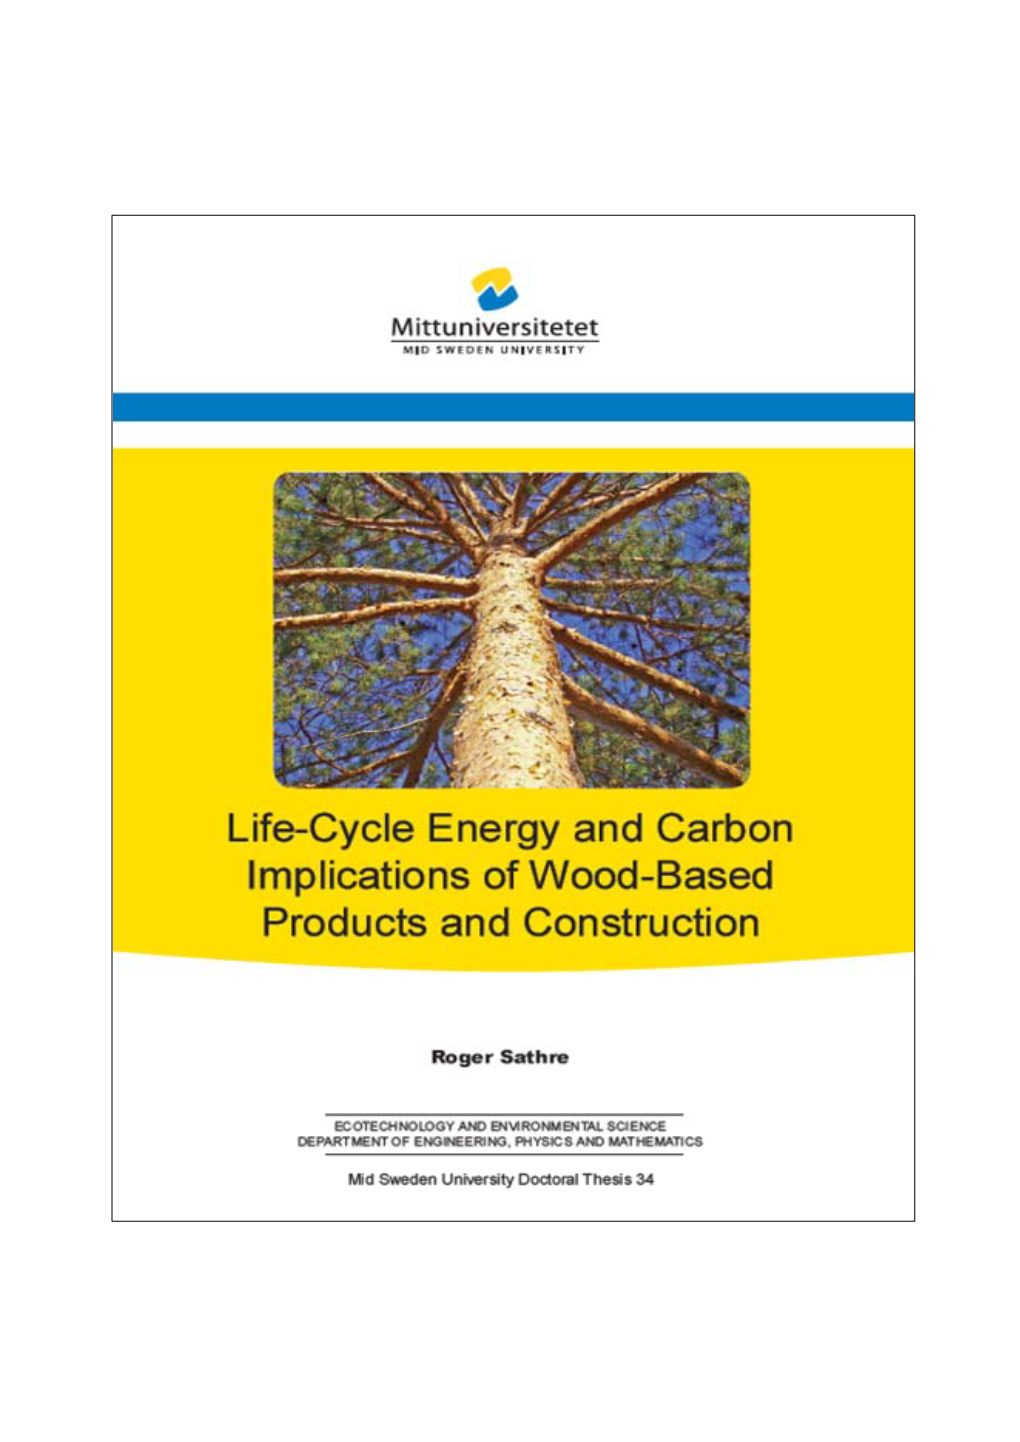 Life-Cycle Energy and Carbon Implications of Wood-Based Products and Construction